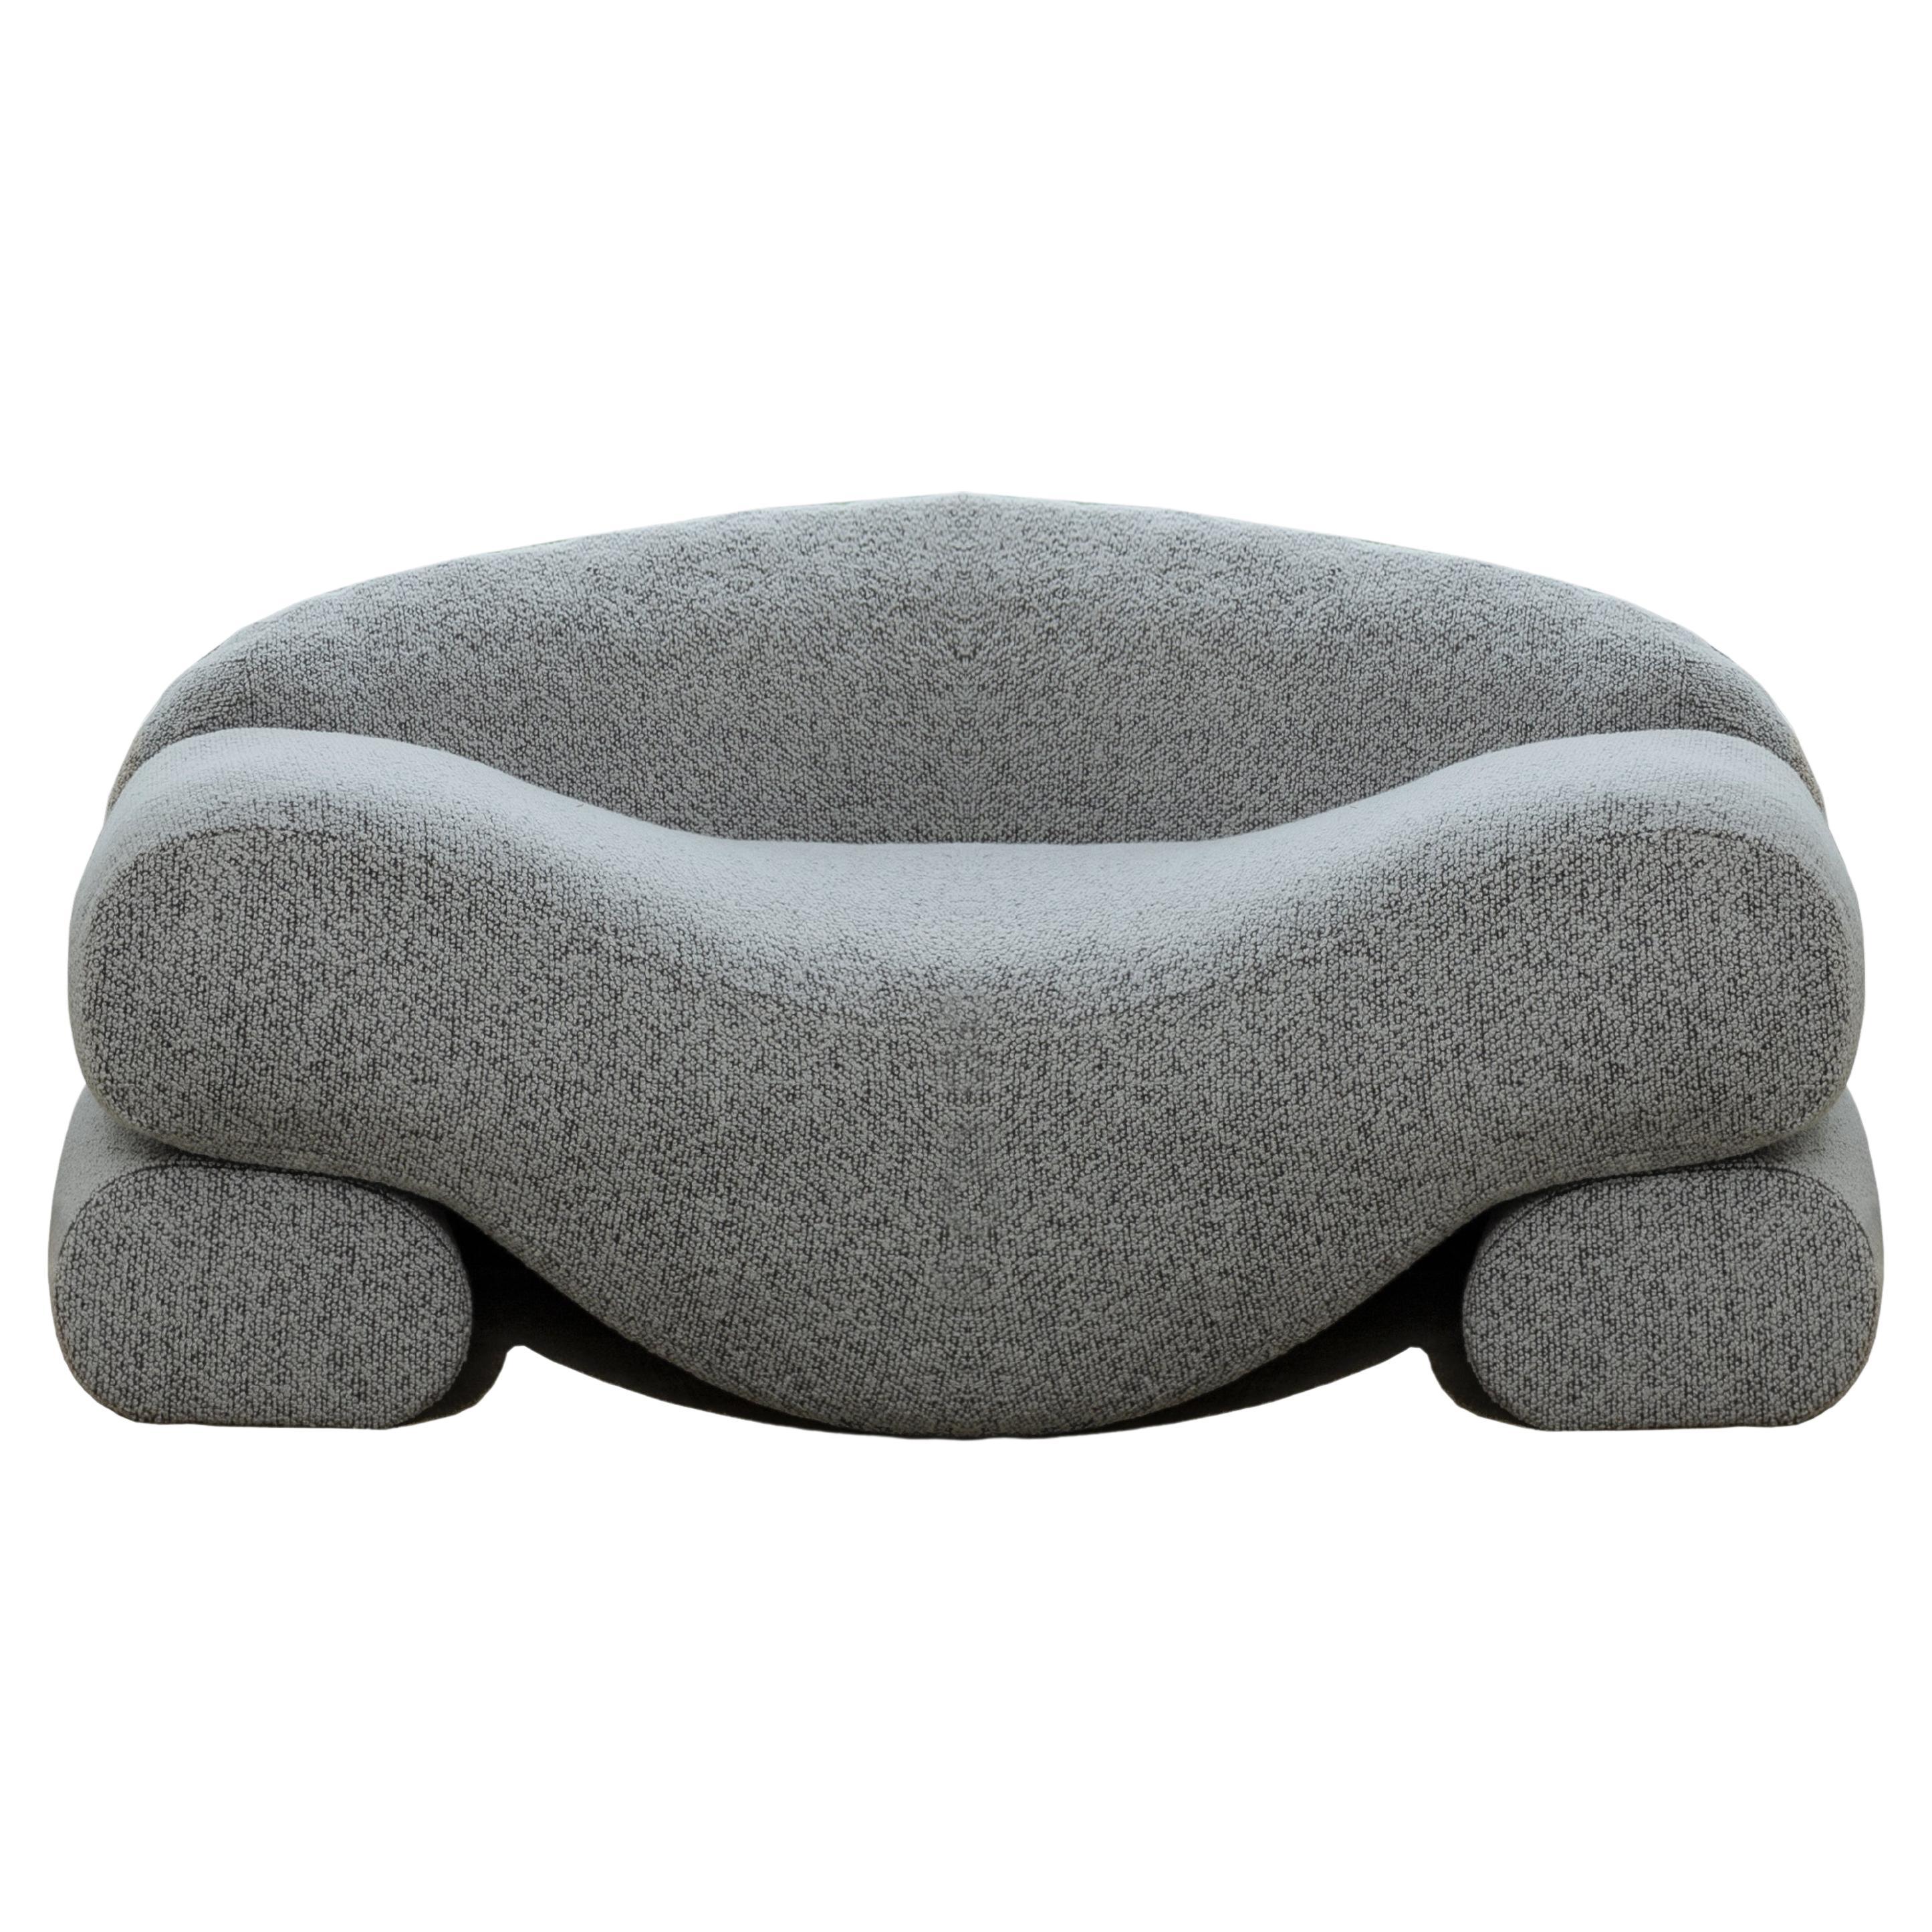 Contemporary all-natural Ergonomic Beanbag Lounger with organic foam and lentisl For Sale